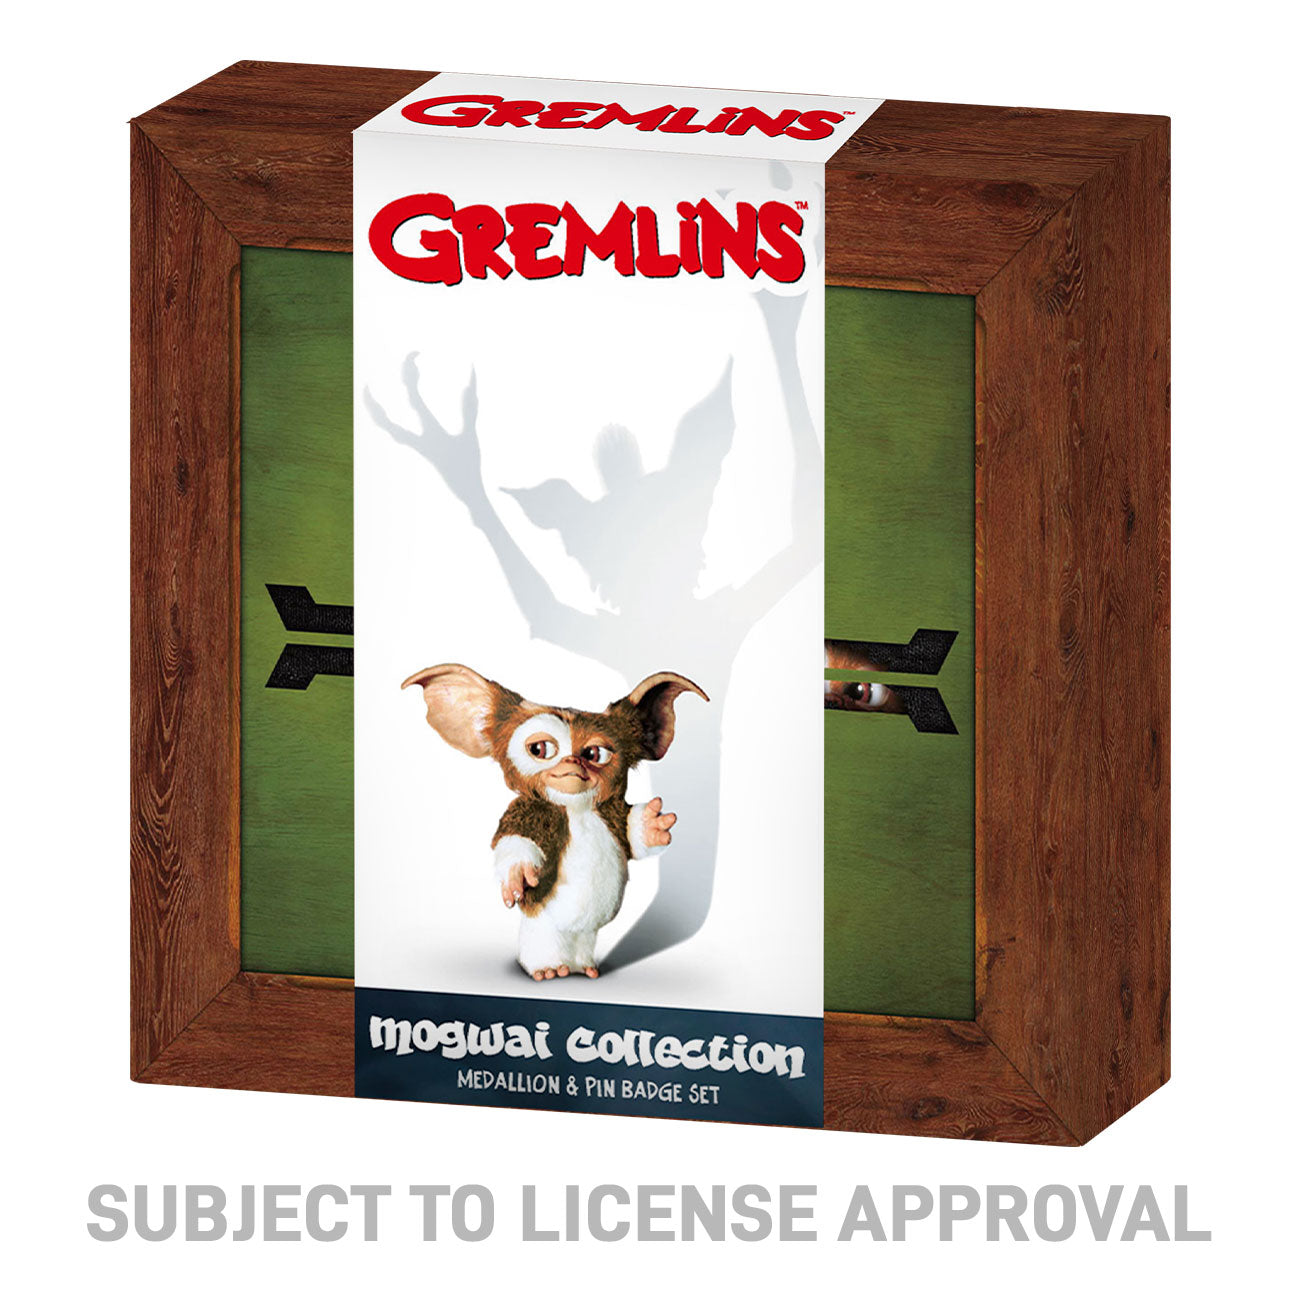 Gremlins Limited Edition Medallion and Pin Badge Set from the Mogwai Collection 